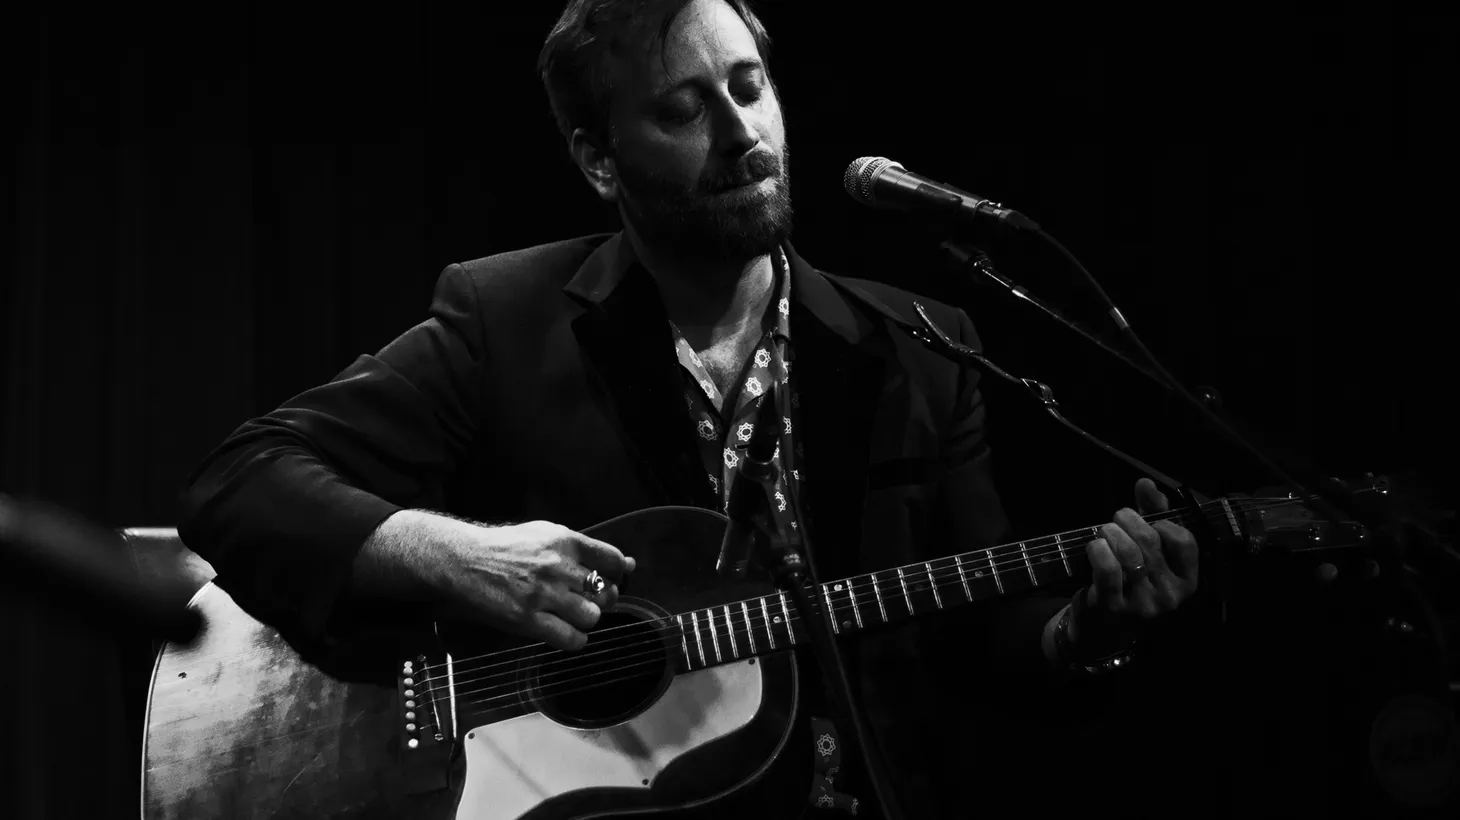 Dan Auerbach keeps busy. As the frontman for the Black Keys, member of the Arcs, and the Grammy Award-winning producer for a wide variety of artists, he finally found time to record first solo album in eight years. (10am)